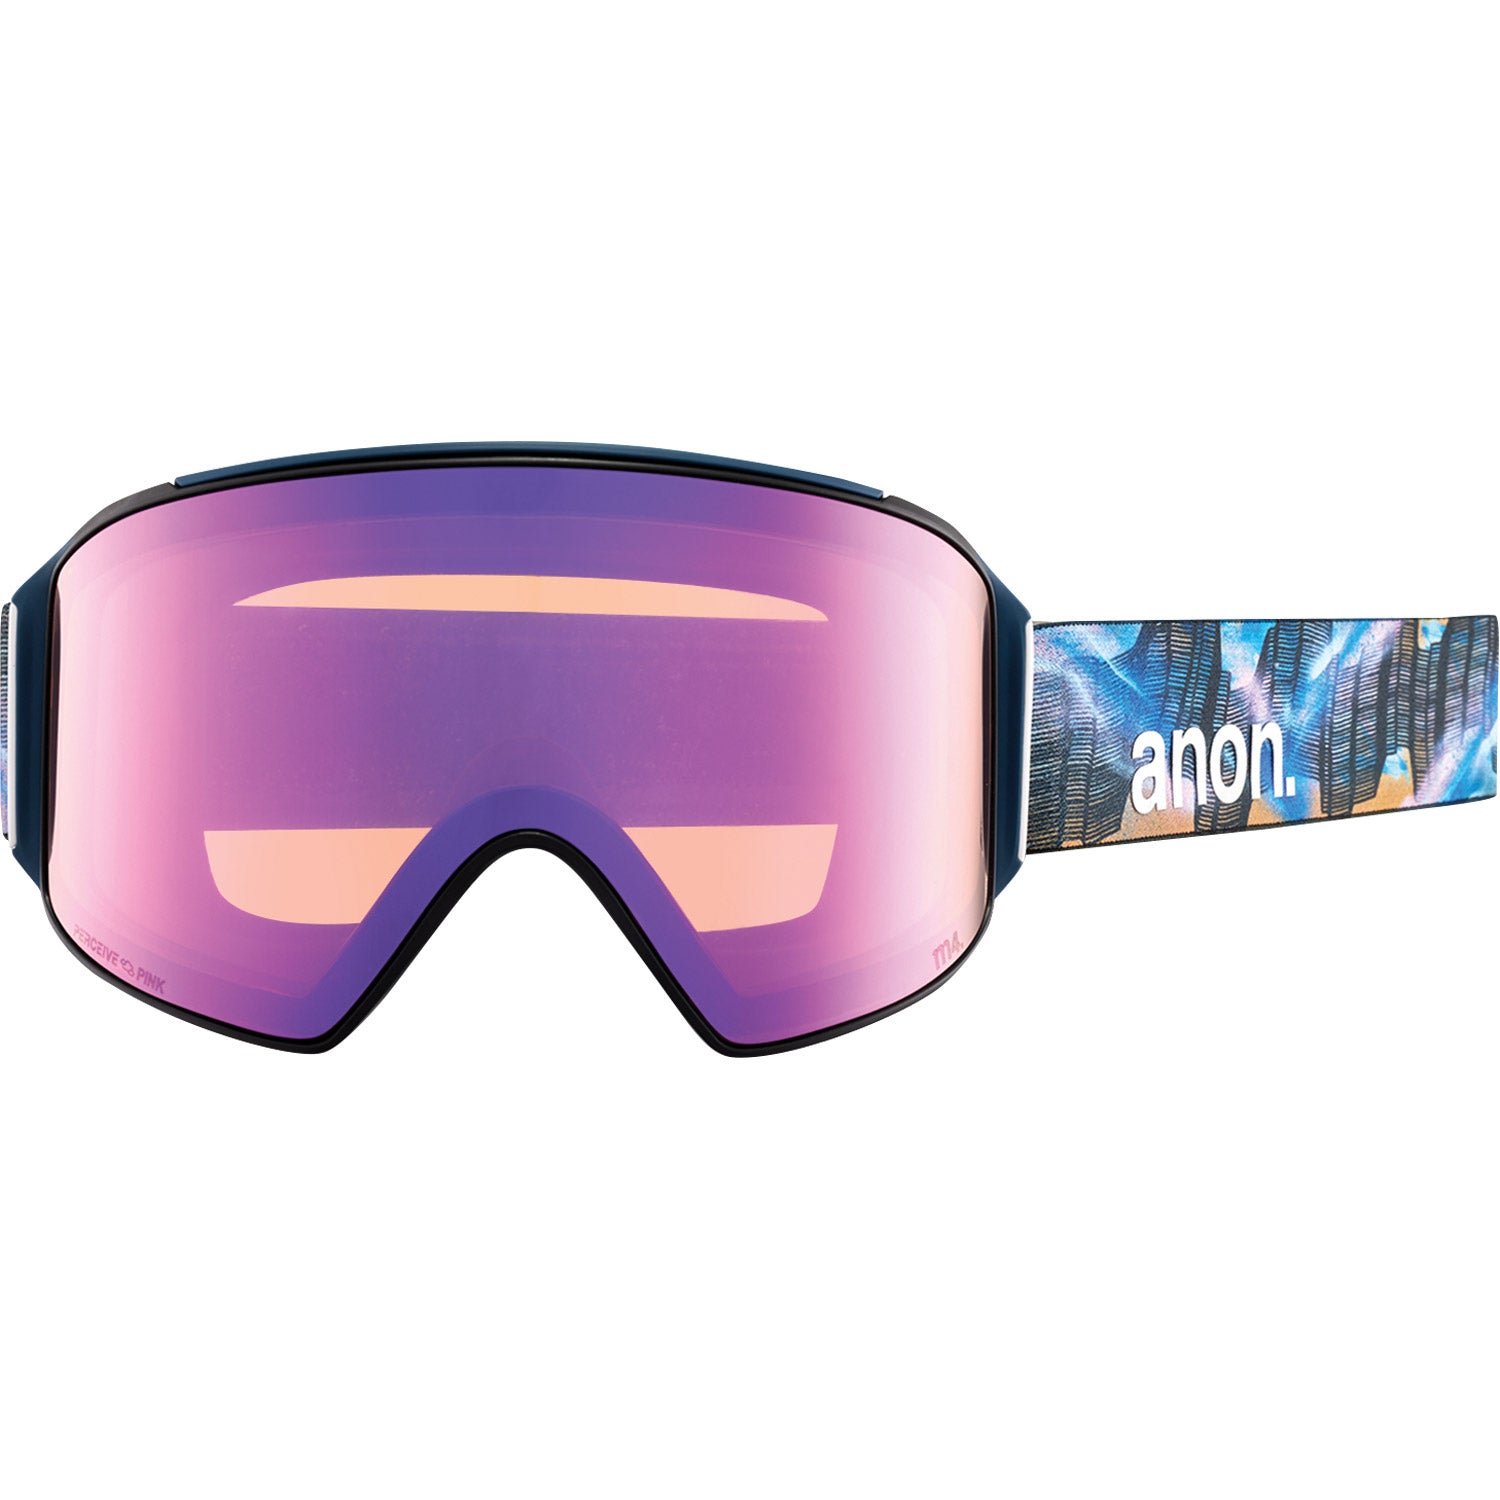 M4 Cylindrical Snow Goggle